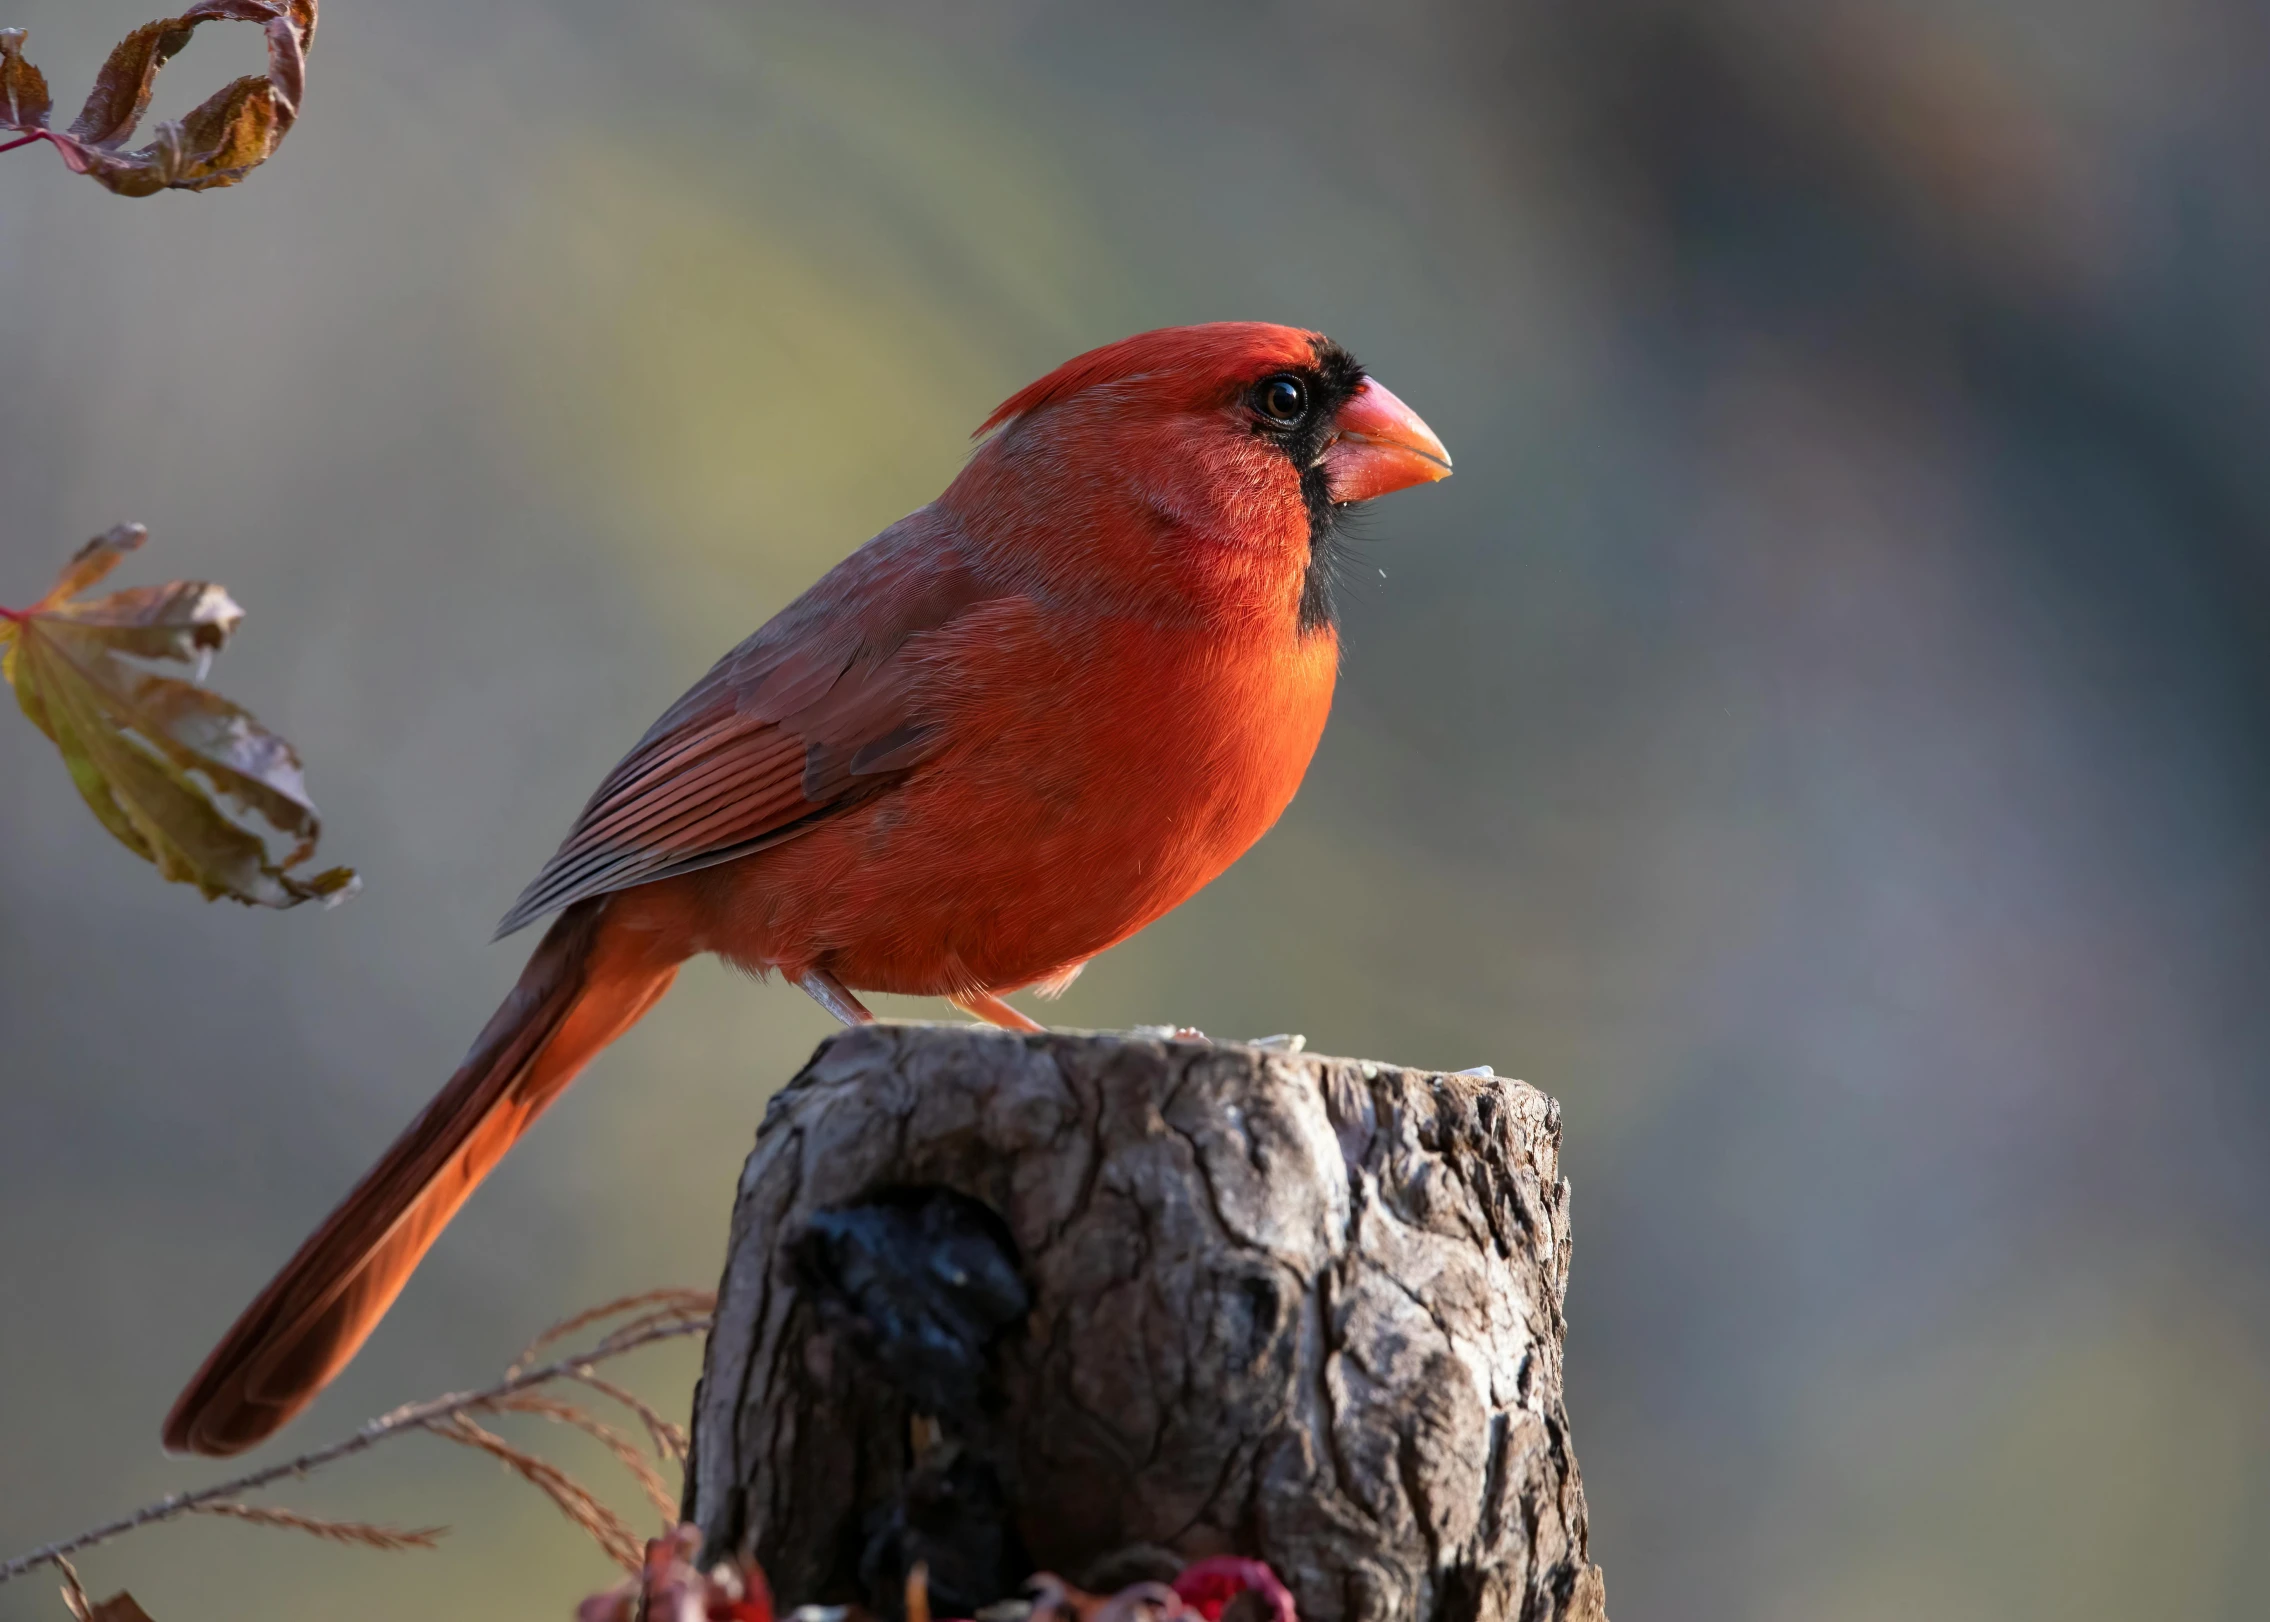 a red bird is perched on top of a tree stump